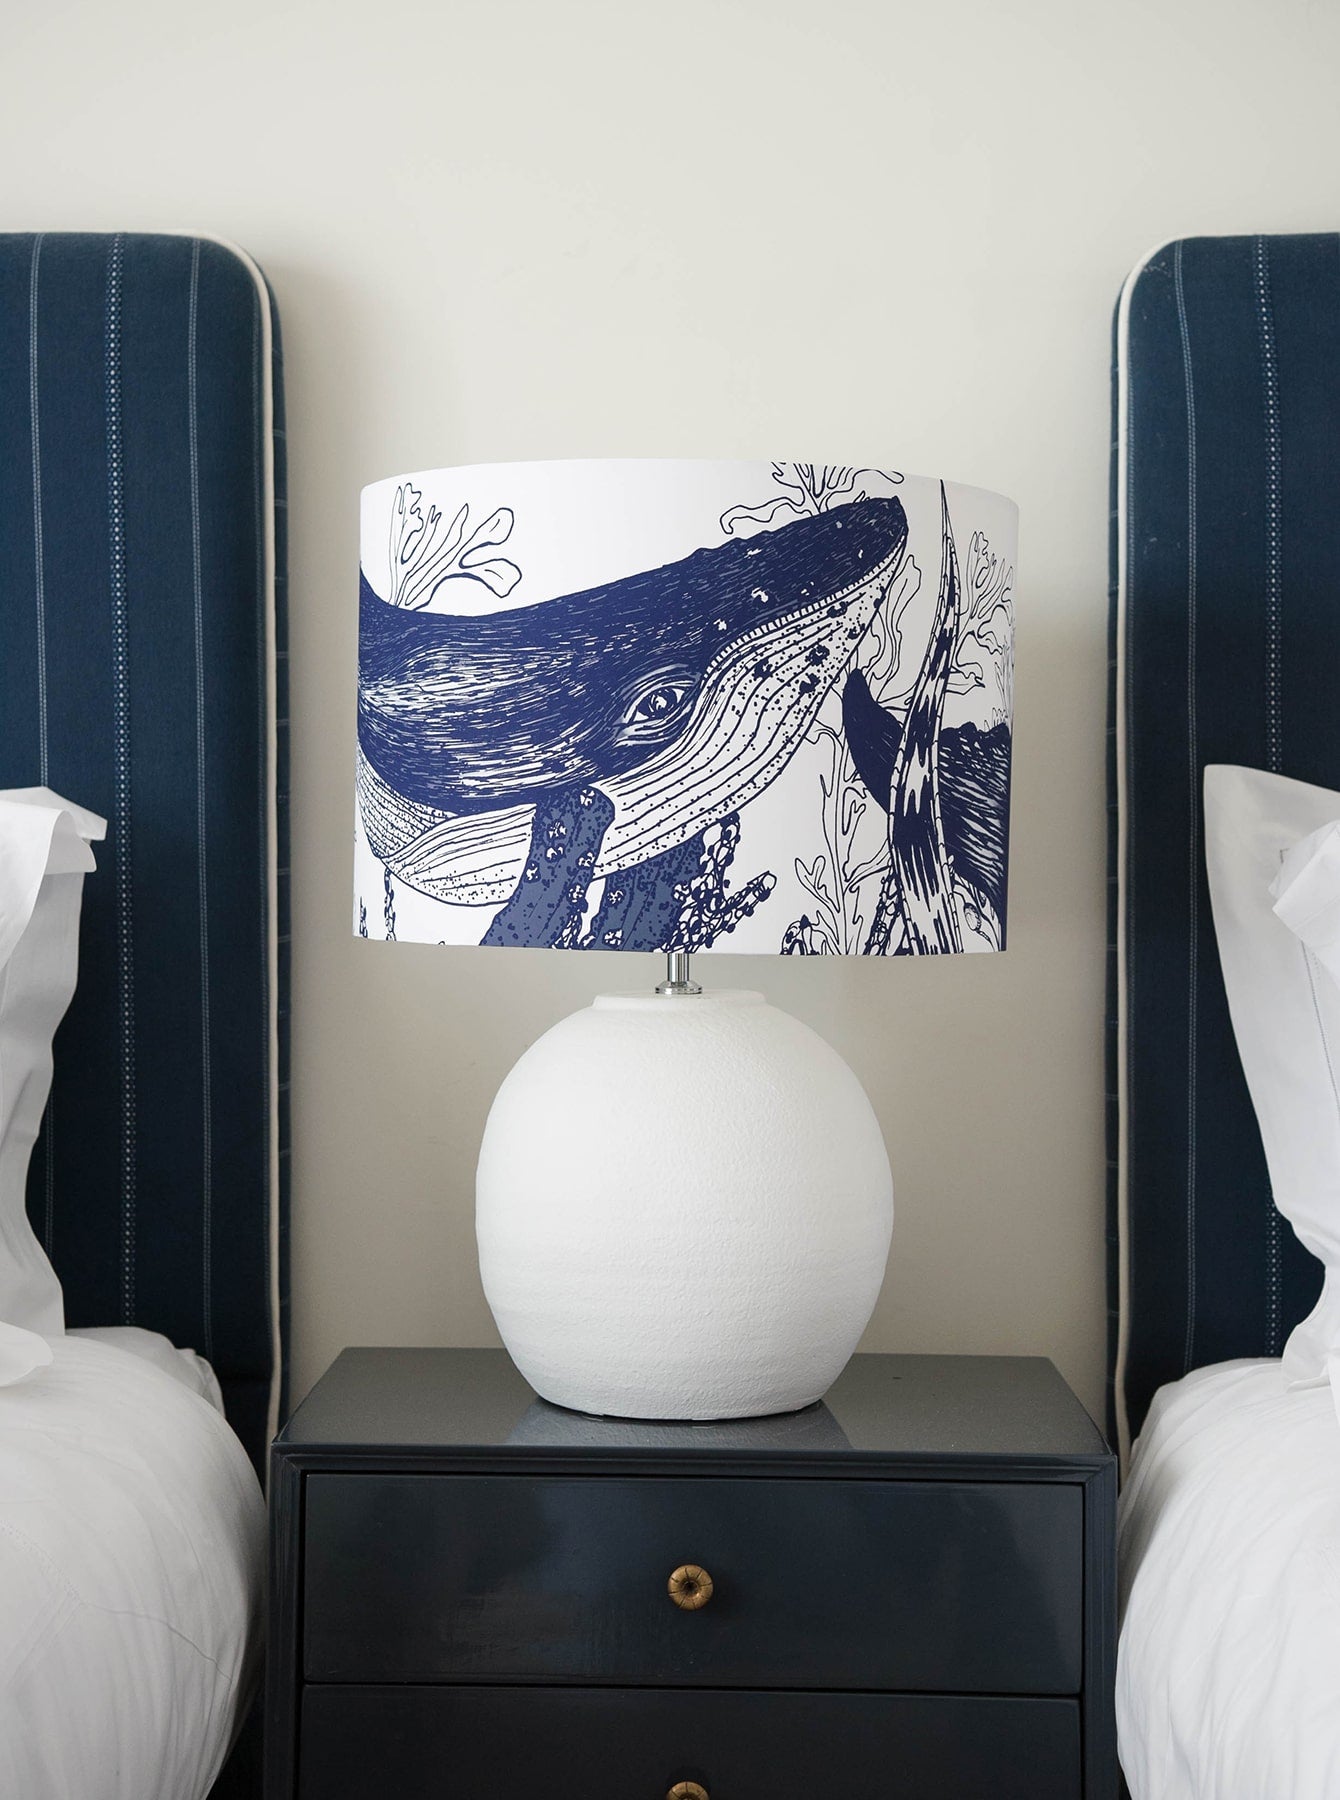 Our Classic Navy Whale design on a white background on a white lampbase on a side table in between two single beds